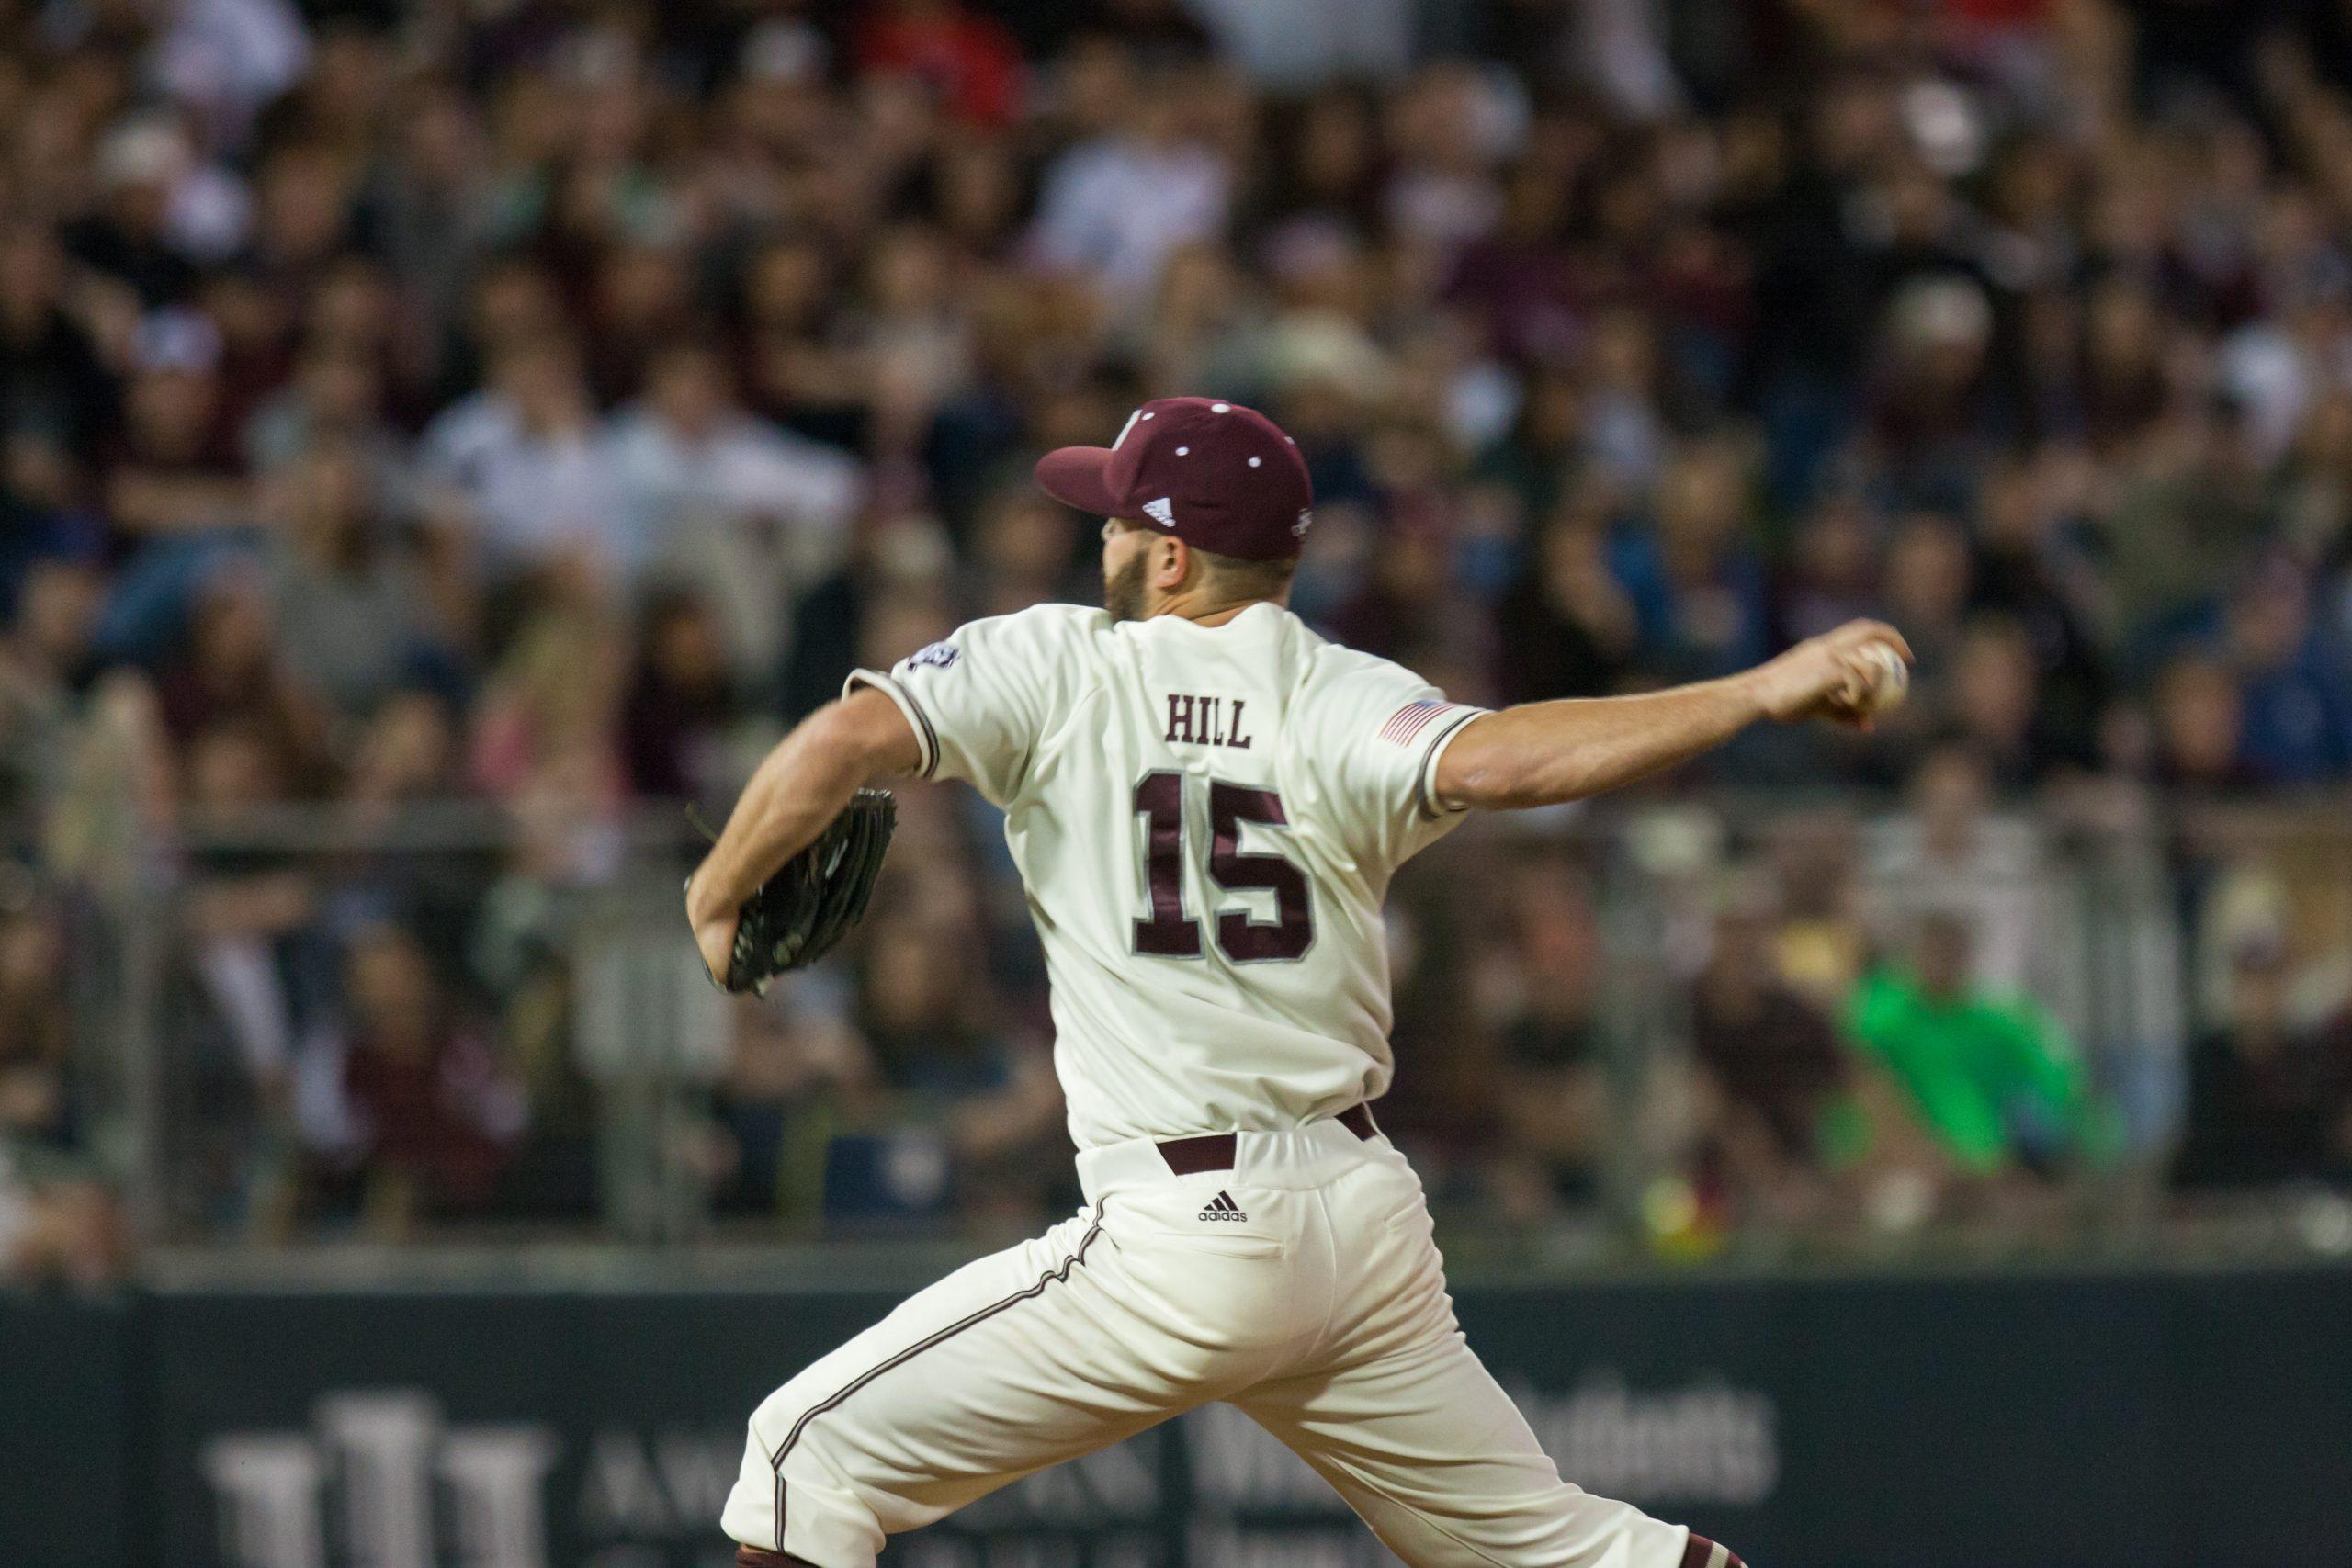 Aggie+offense+explodes+for+15+runs+in+opening+day+victory+over+Bowling+Green